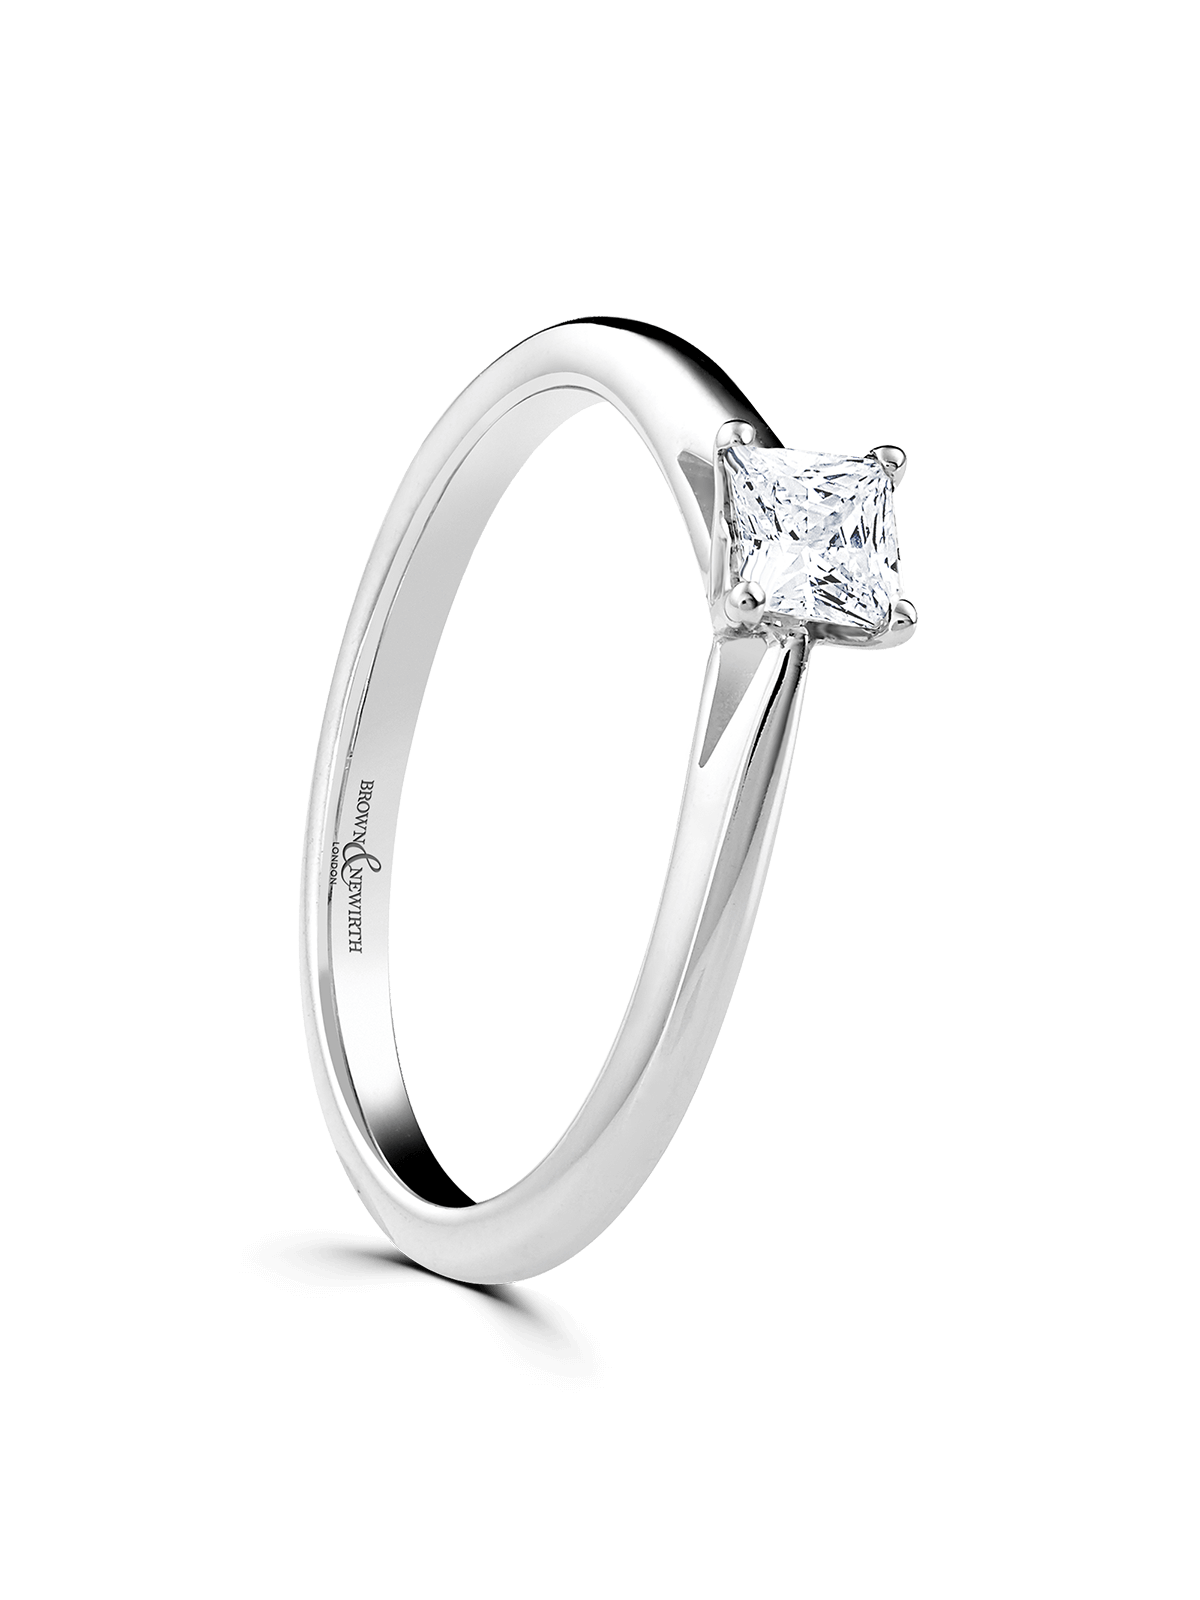 Brown & Newirth Heartbeat 0.33ct Princess Cut Certificated Diamond Solitaire Engagement Ring in Platinum